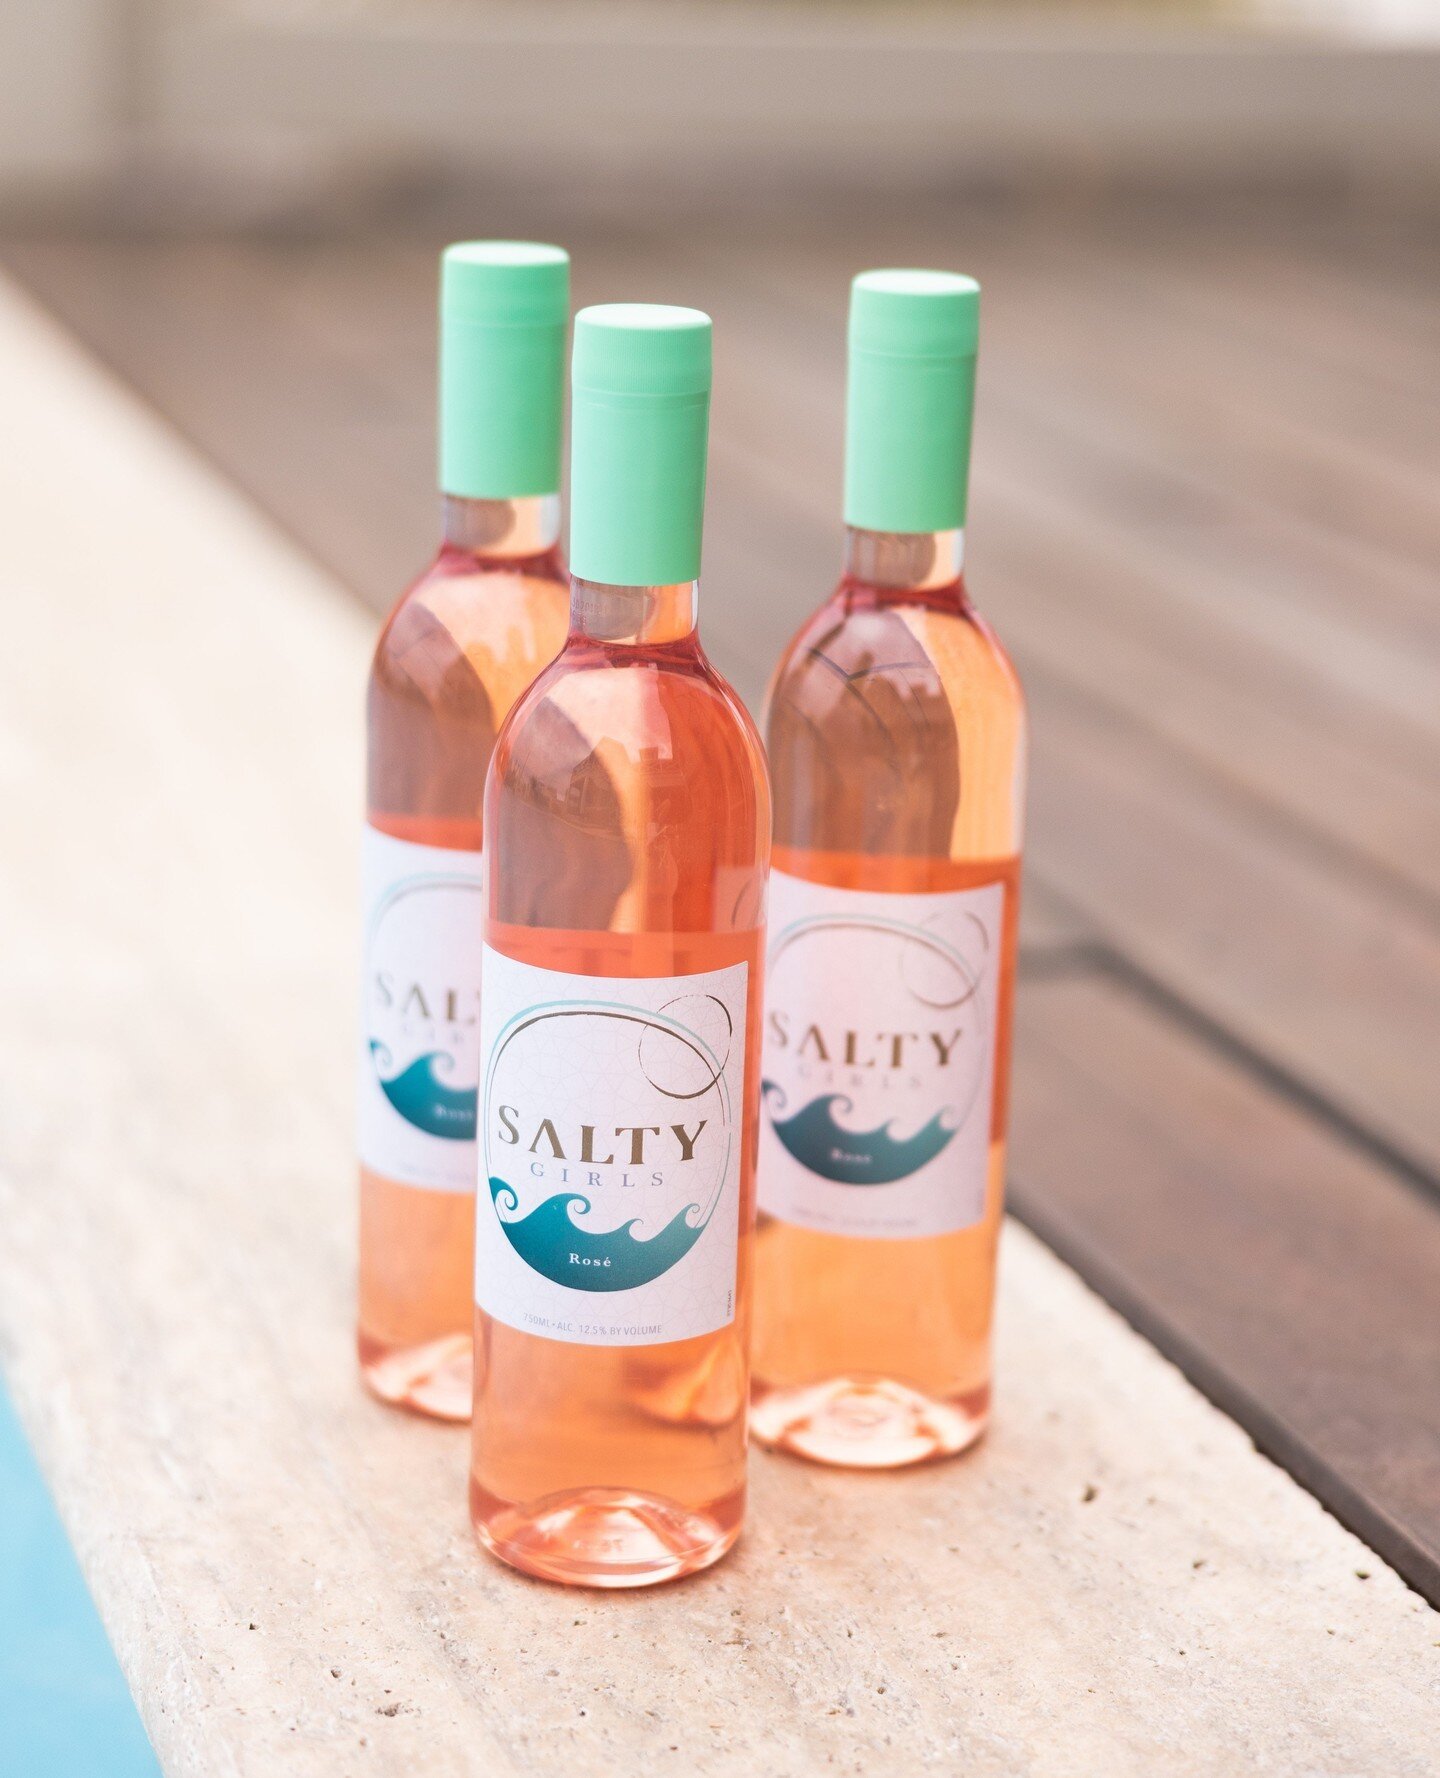 Drumroll, please... ⁠
⁠
You can now (FINALLY) have your Ros&eacute; and the beach or pool, too 💞⁠
⁠
Our beach and pool-friendly Ros&eacute; was founded in 30A and imported from the South of France for the perfect #SipSalty experience. ⁠
⁠
🥂 Get you